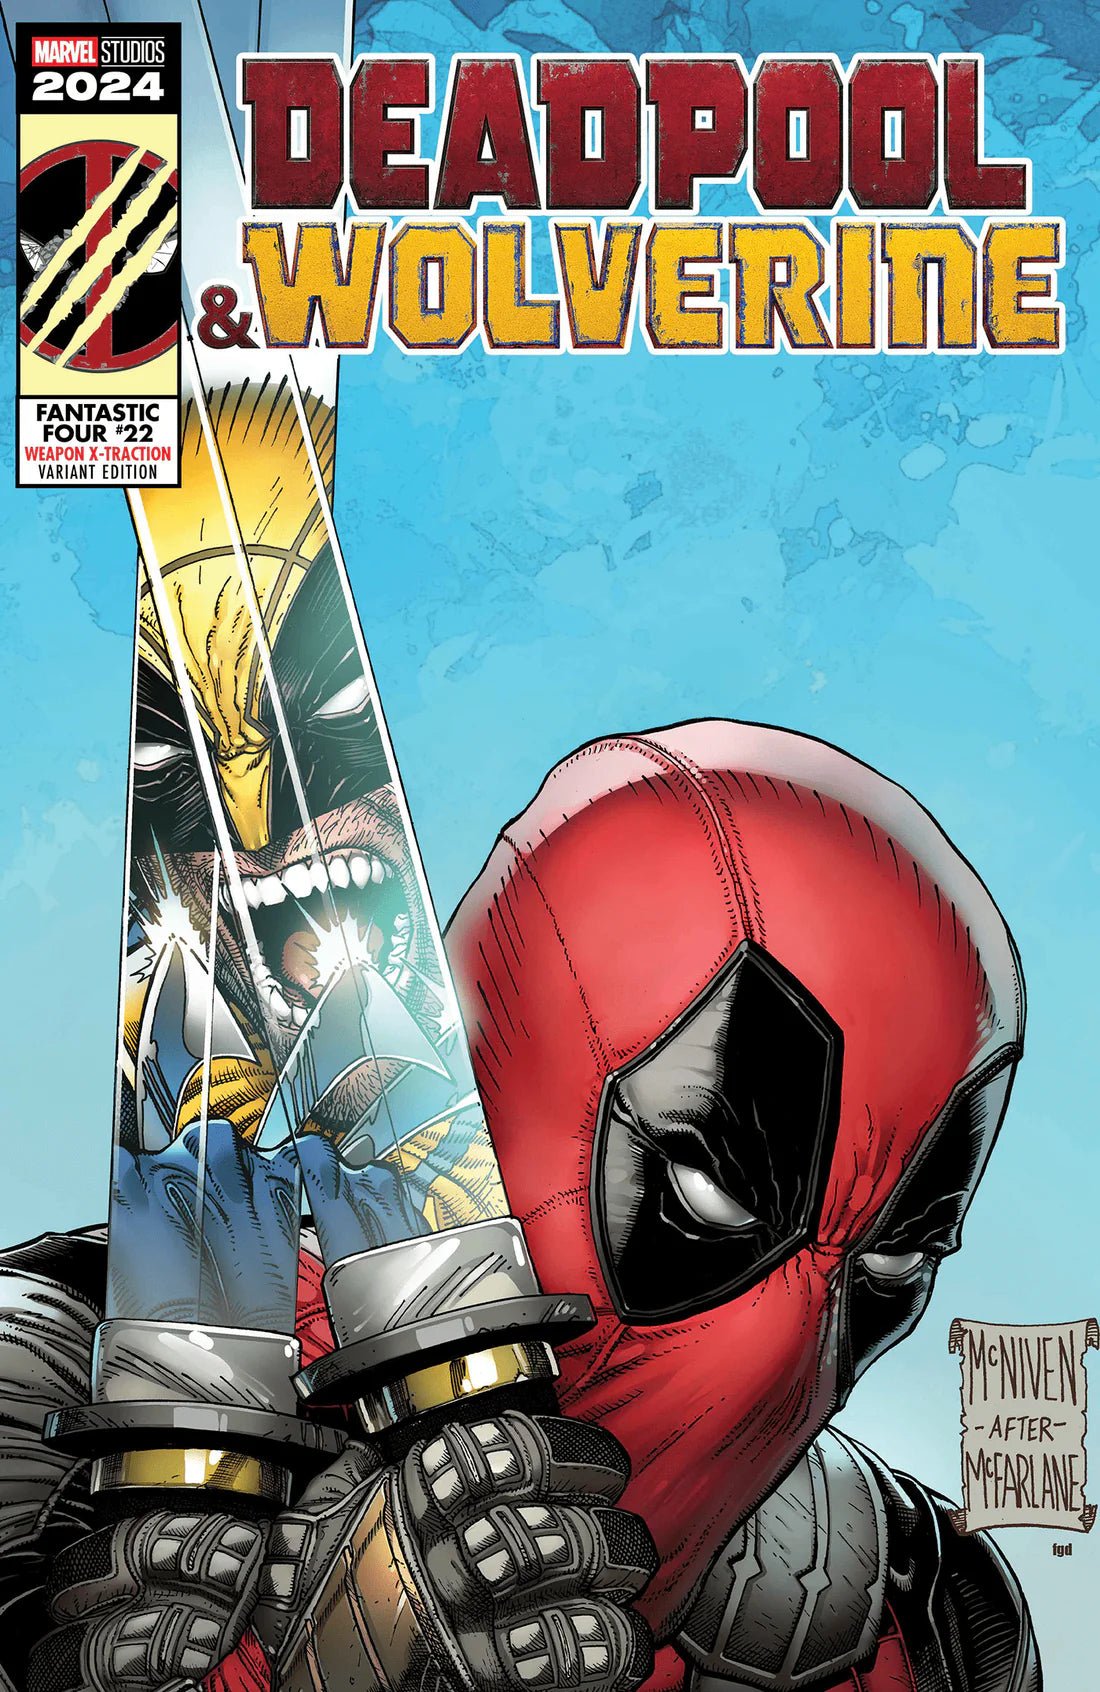 Fantastic Four #22 Steve Mcniven Deadpool & Wolverine Weapon X - Traction Variant - FURYCOMIX